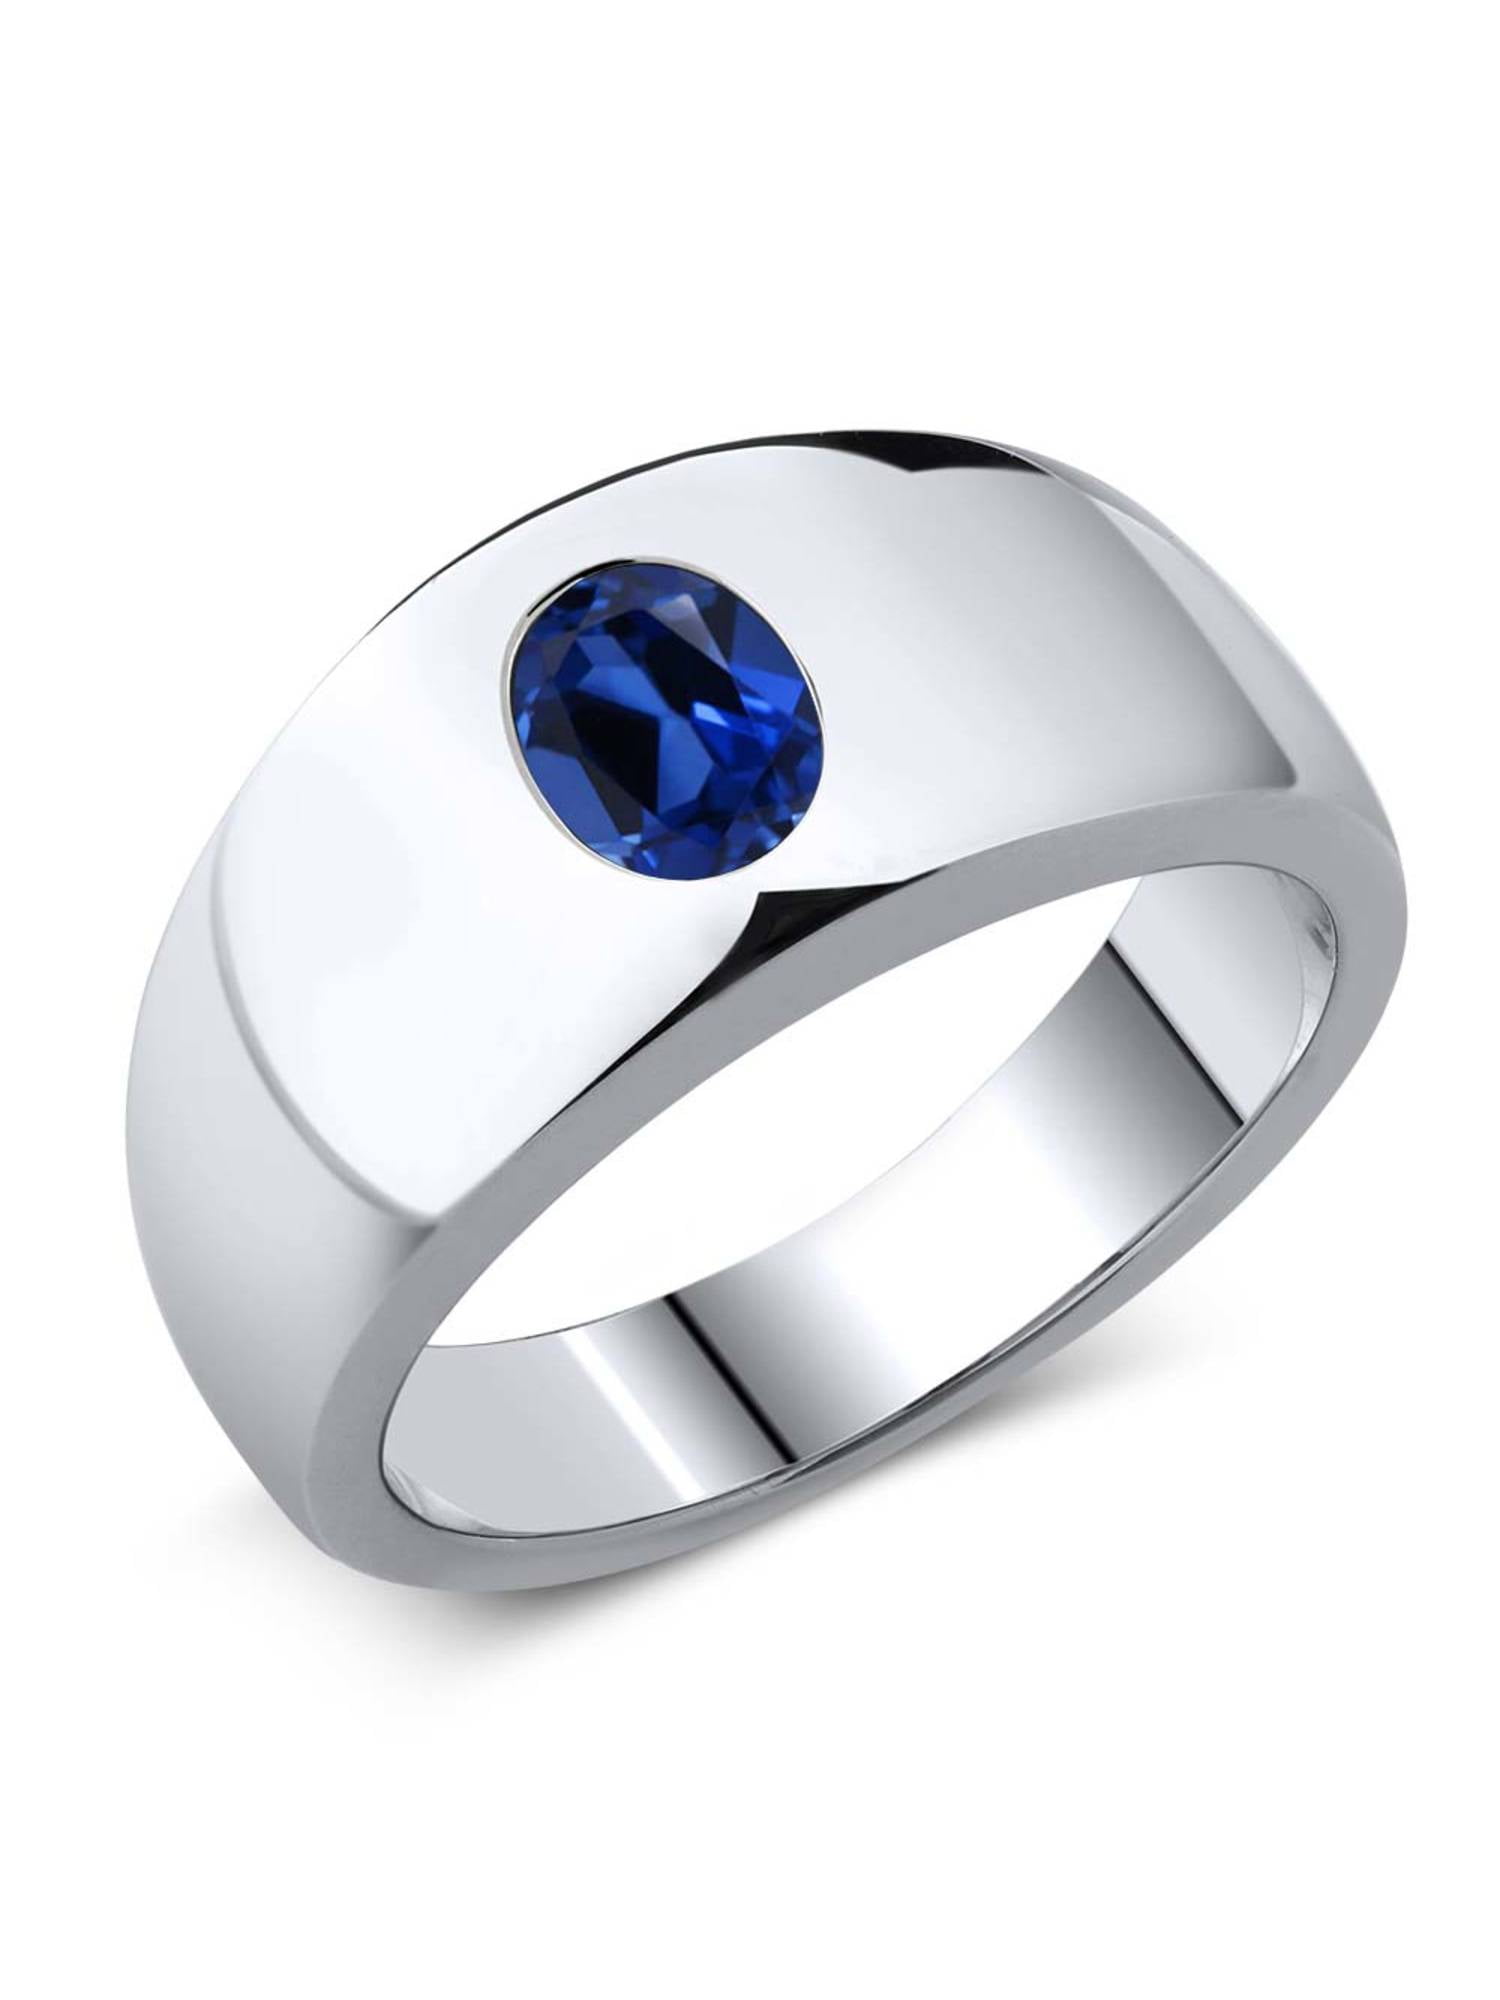 1.91 Ct Princess Blue Simulated Sapphire 925 Sterling Silver Men's Ring 